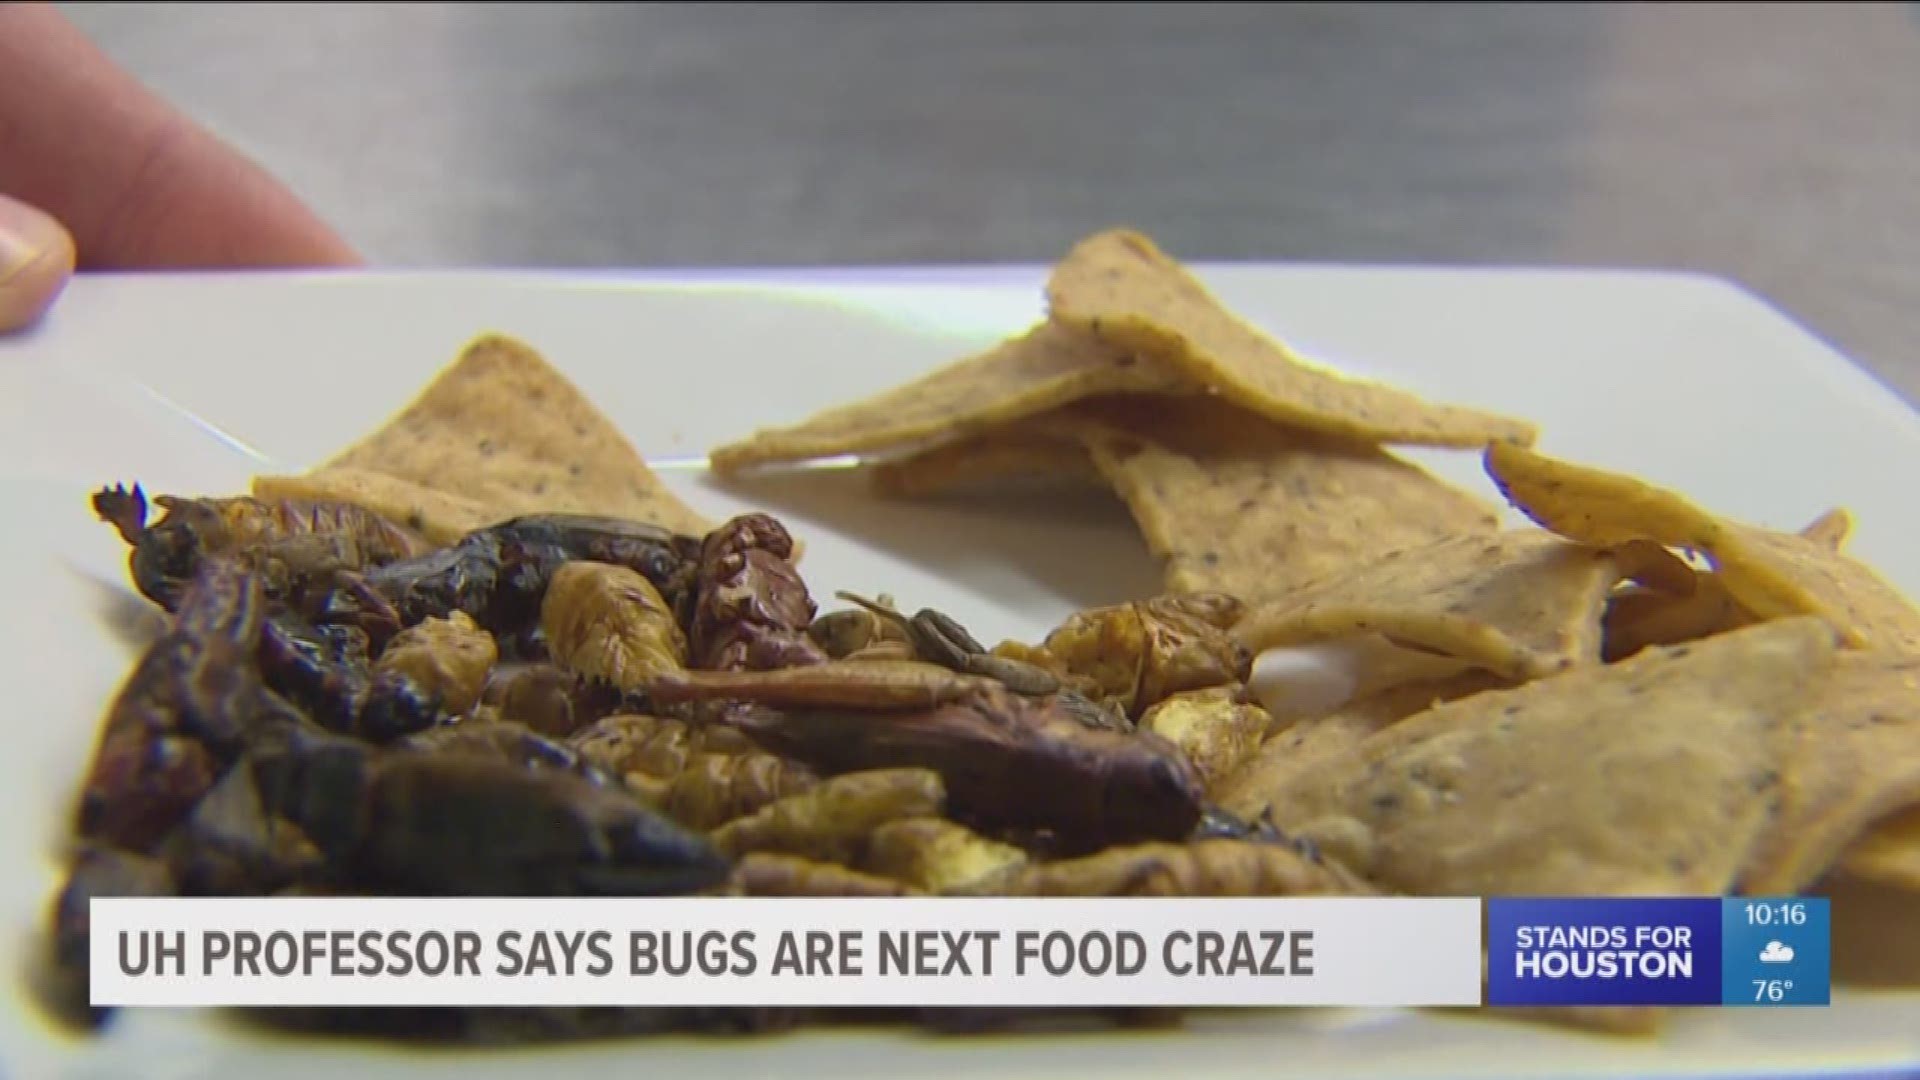 A UH professor believes insects are the next food craze with health benefits.